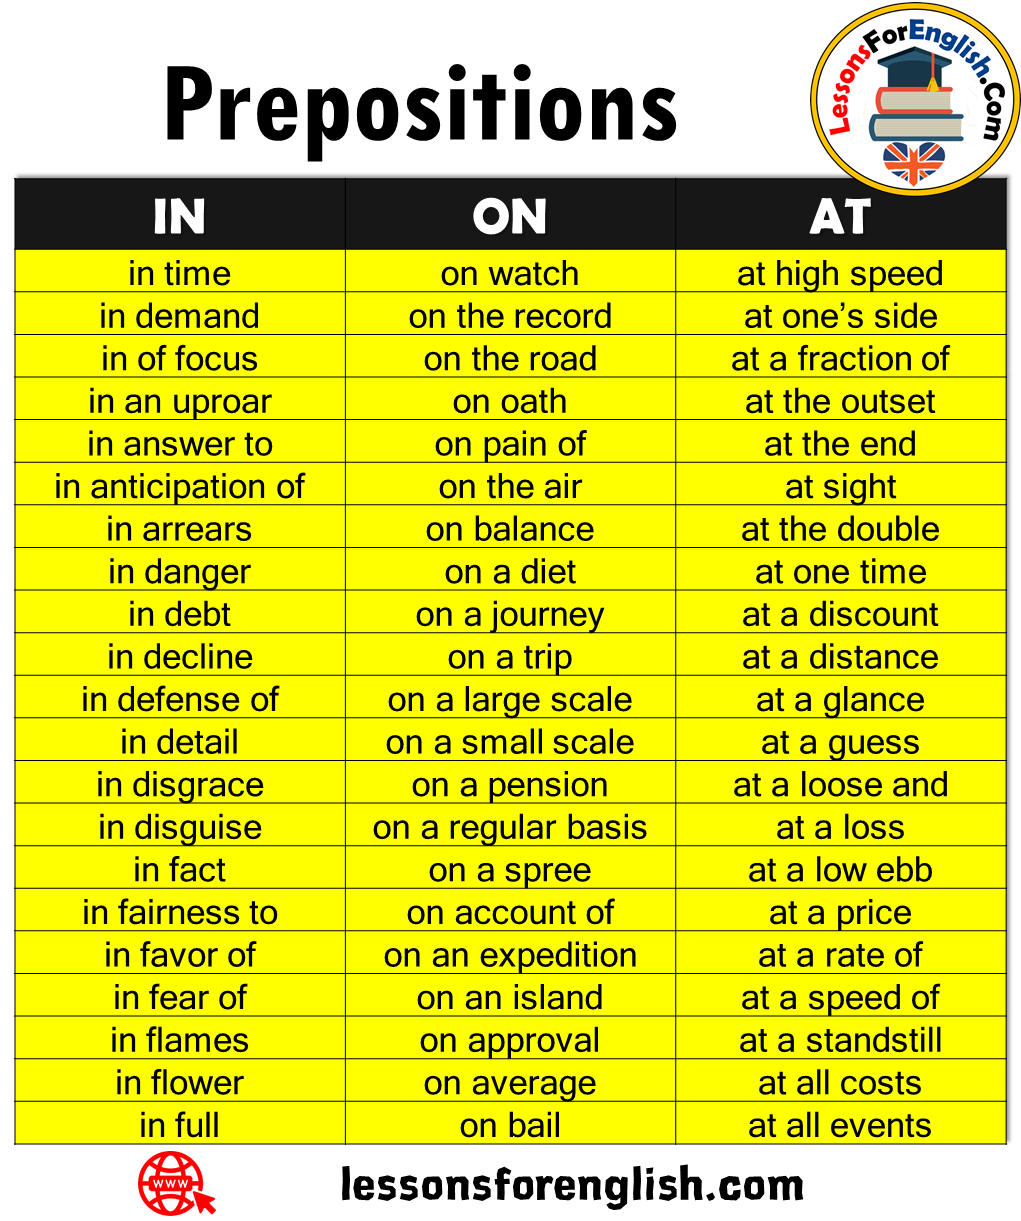 Prepositions in English with examples